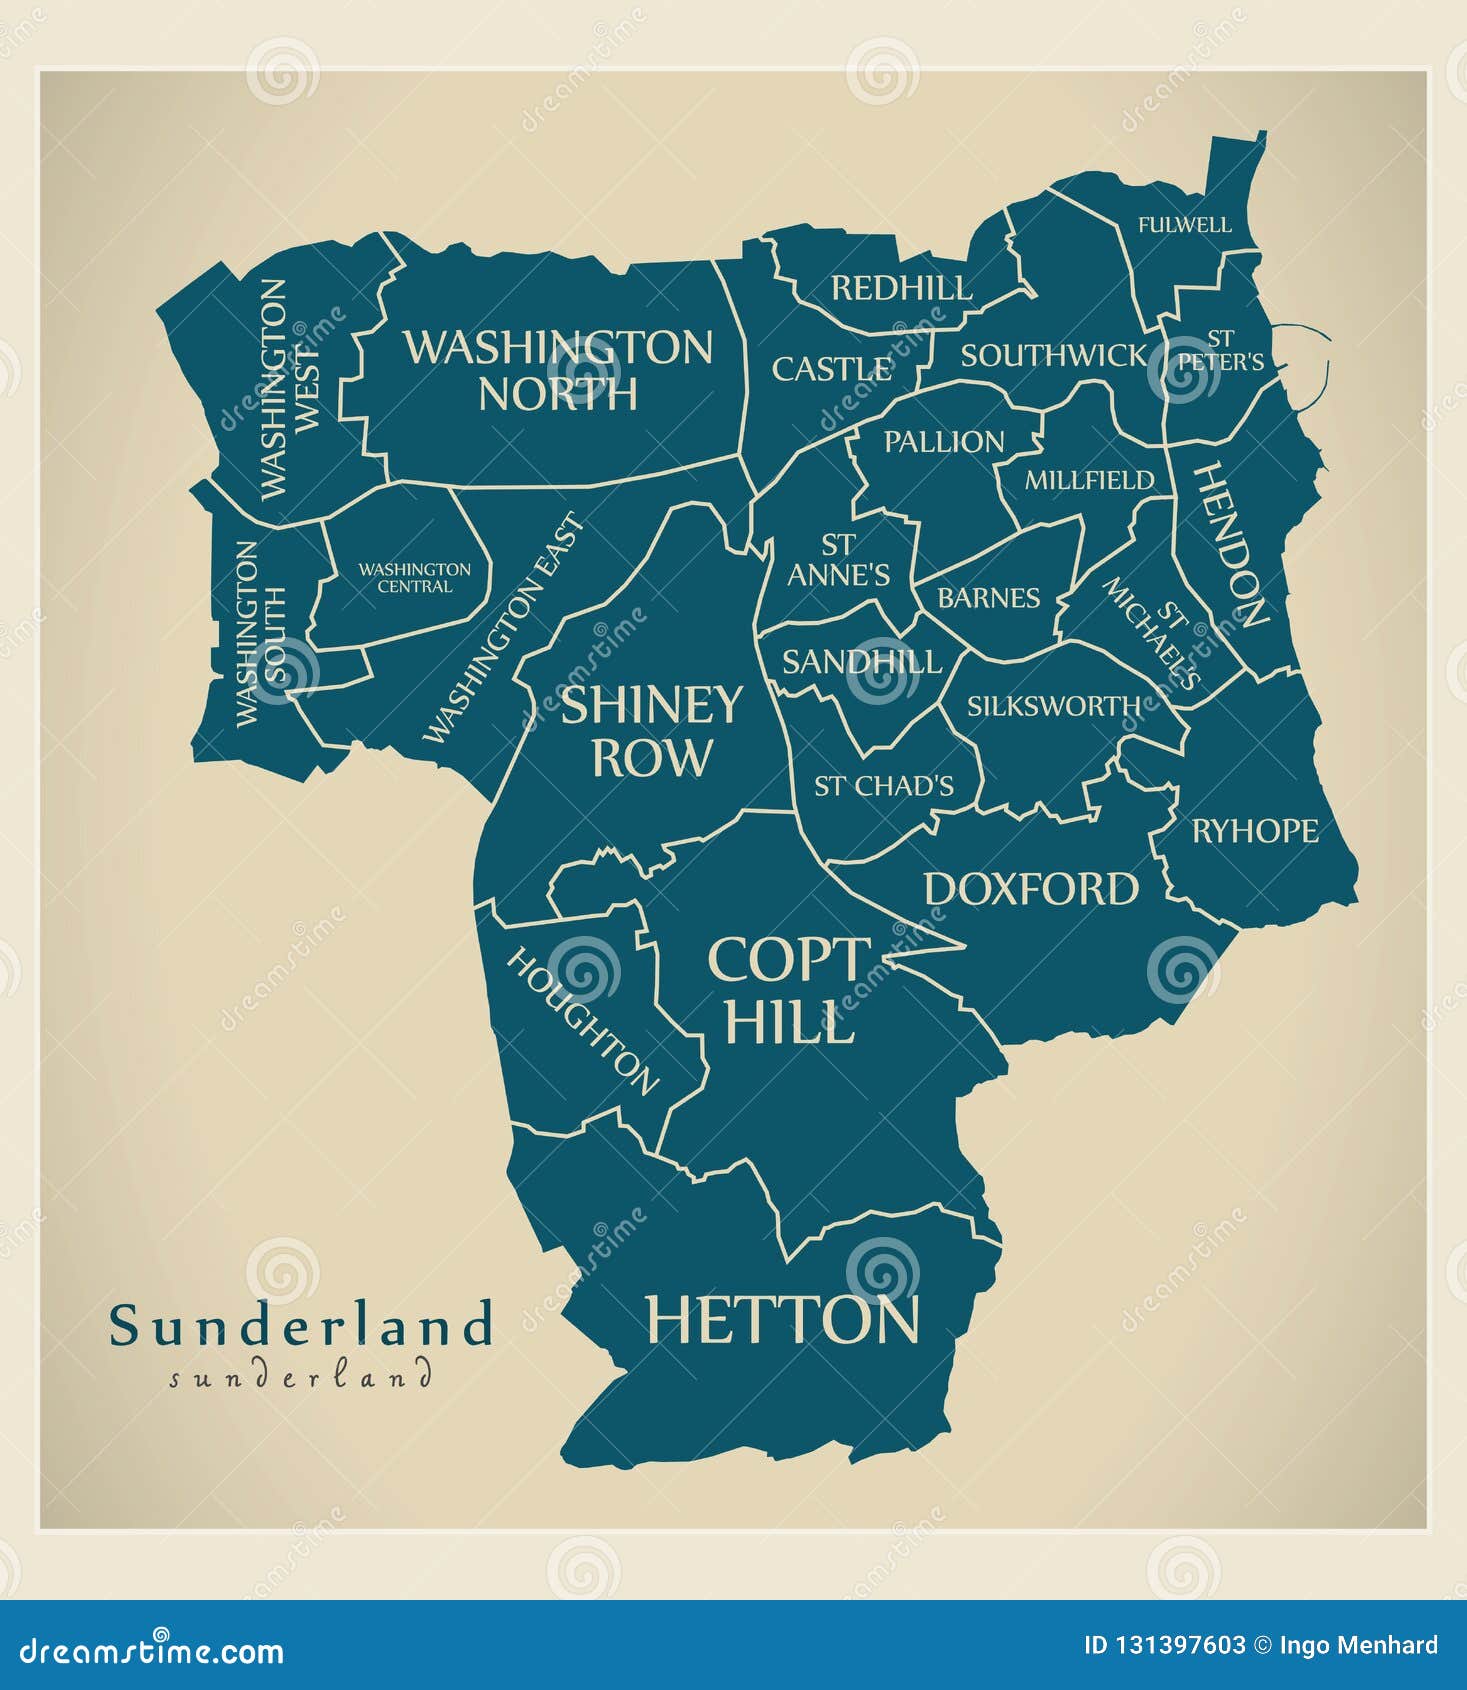 modern city map - sunderland city of england with wards and titles uk